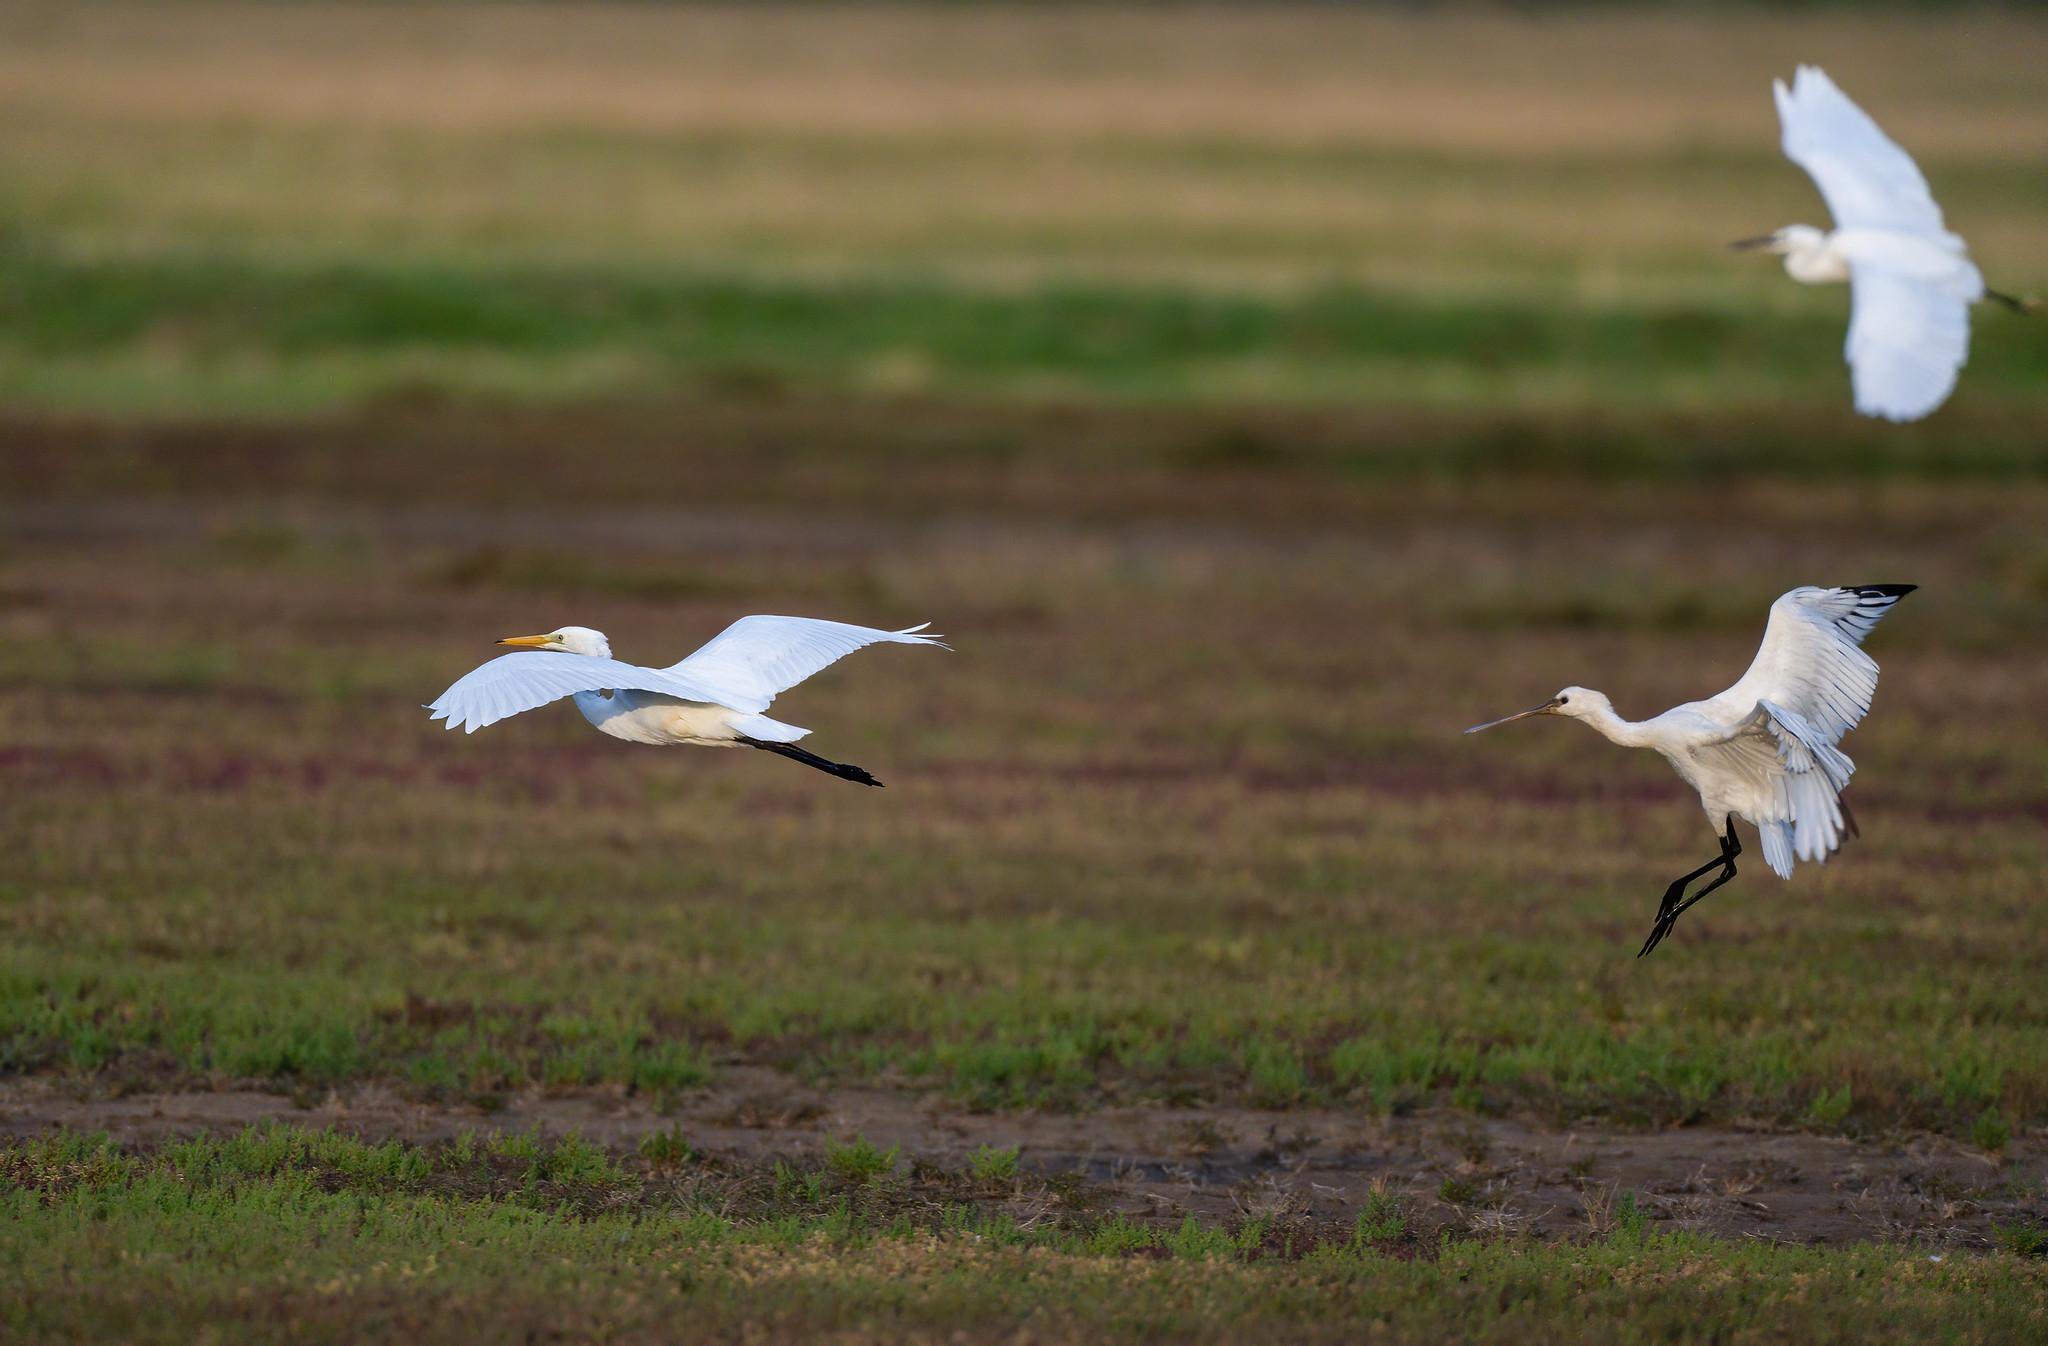 Great White Egret, Spoonbill and Little Egret - in early light